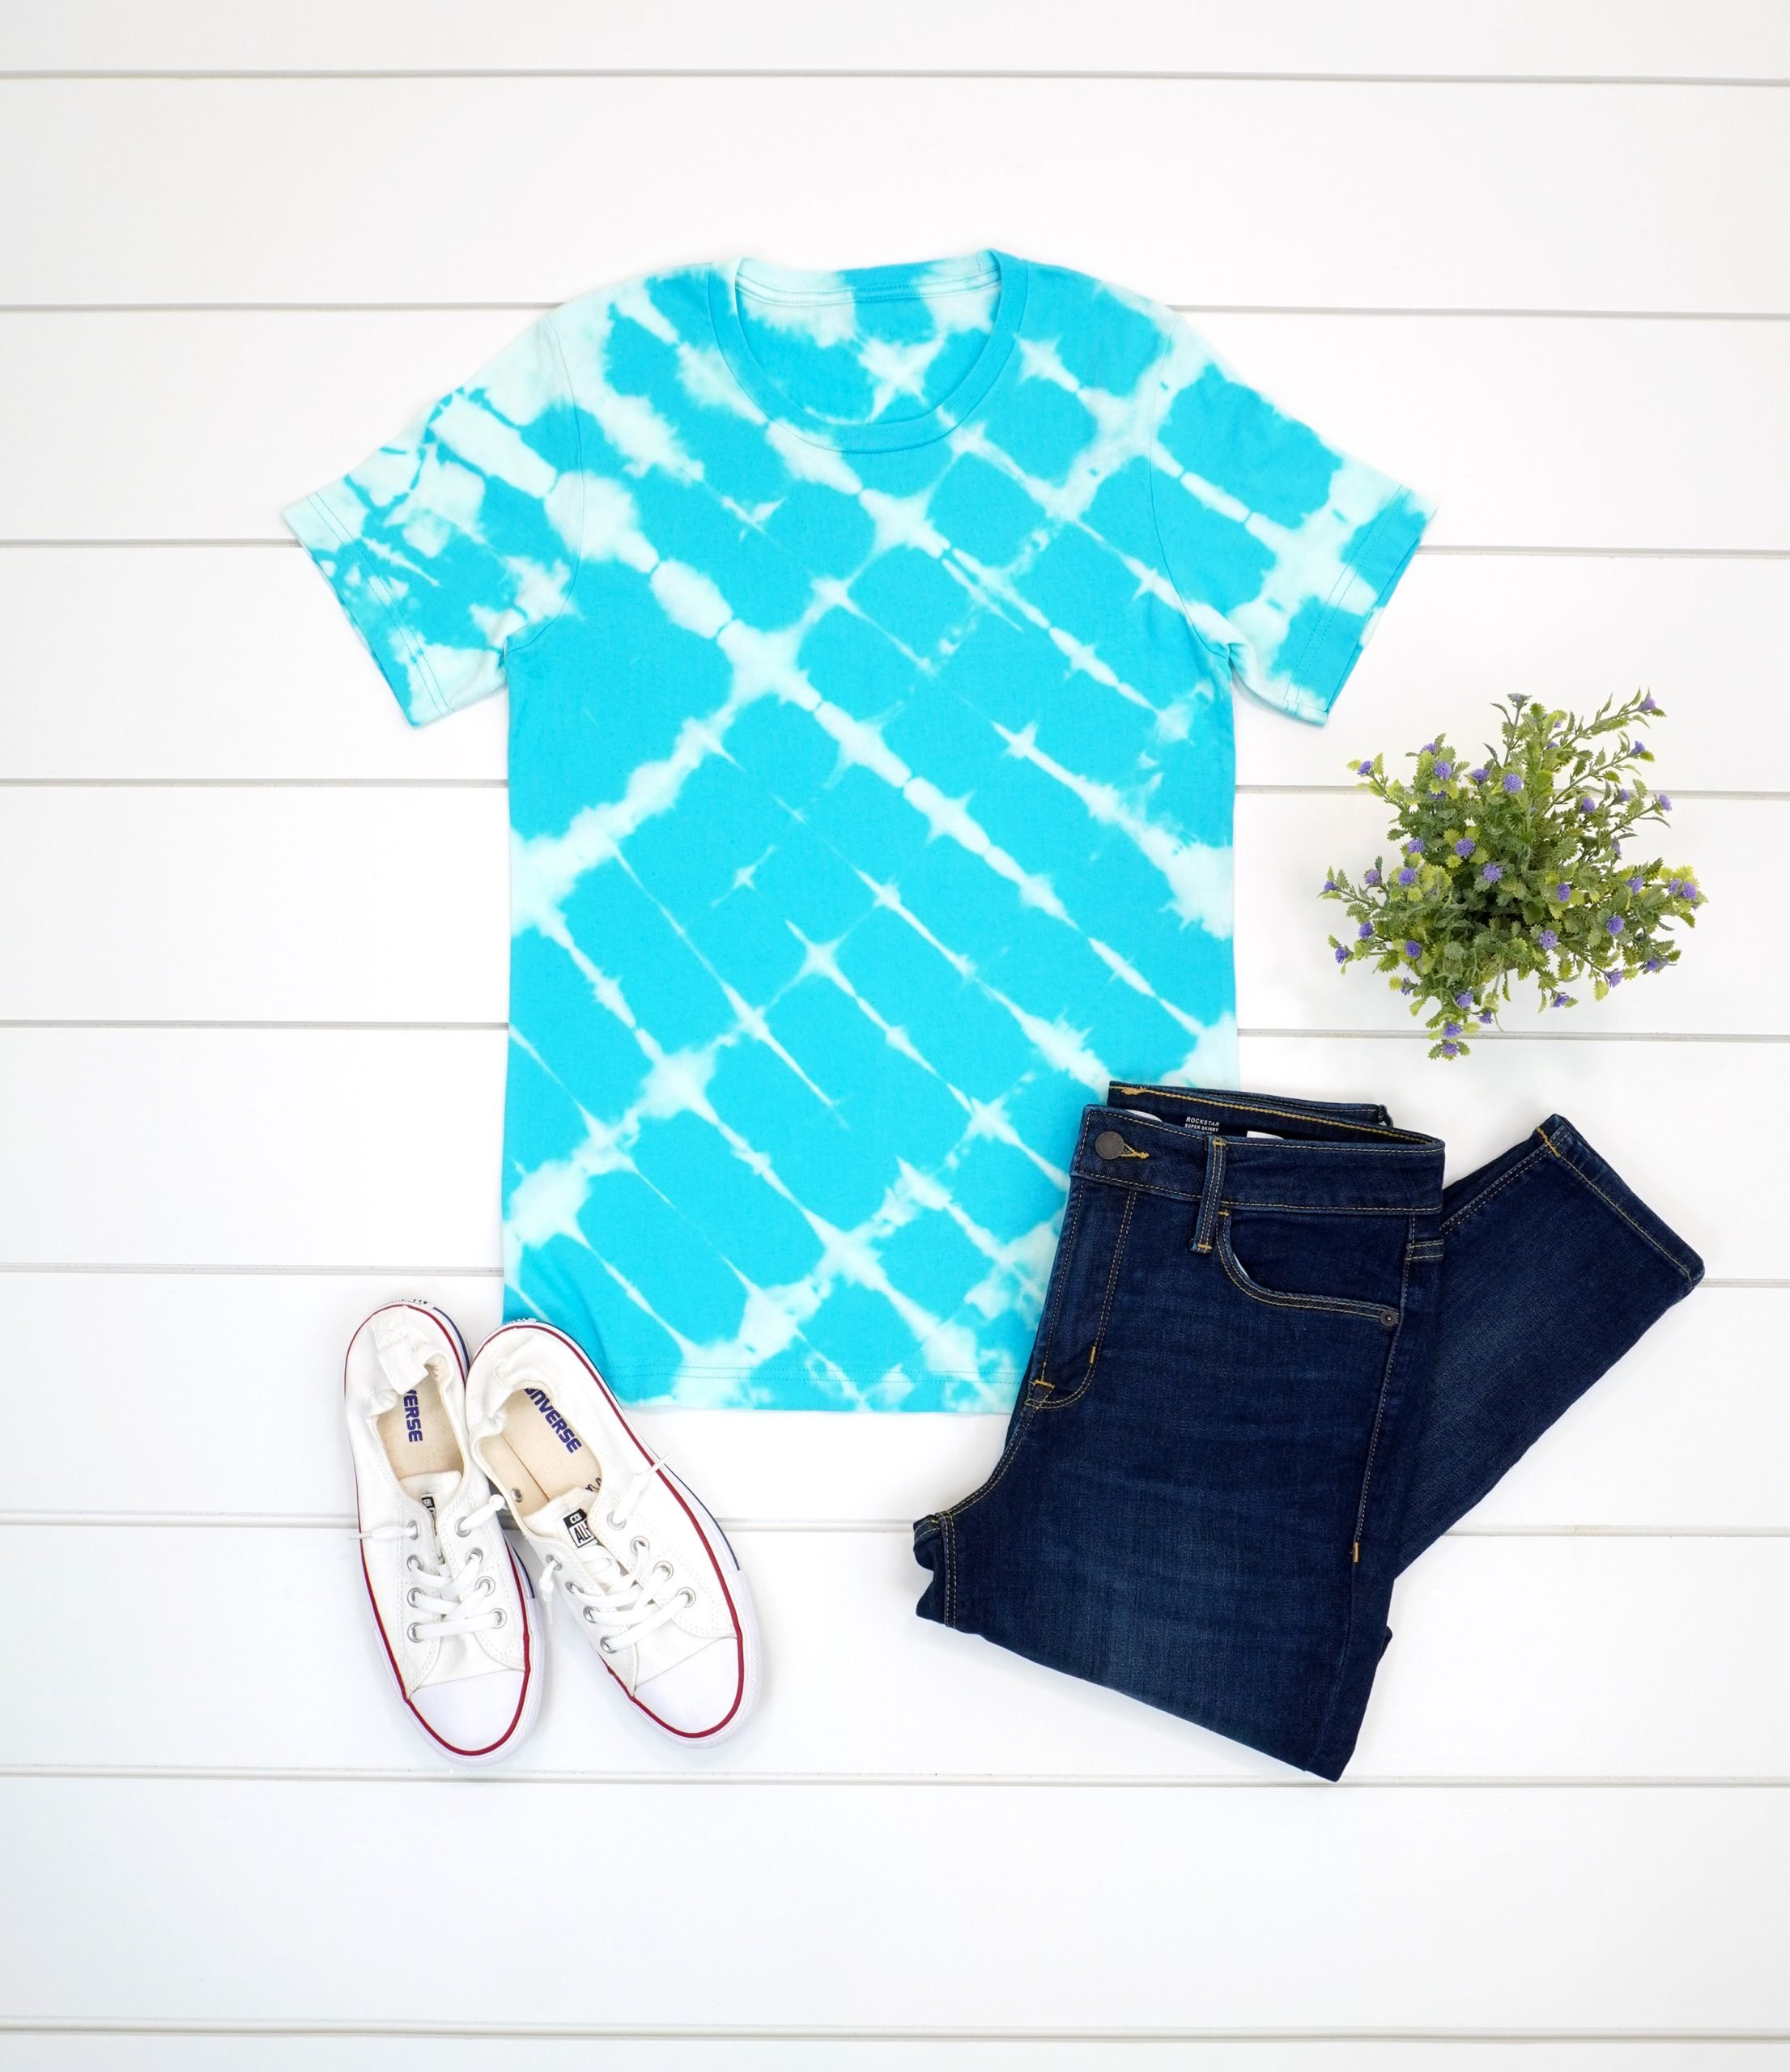 Aqua blue bleach tie dye t-shirt with outfit on white wood background